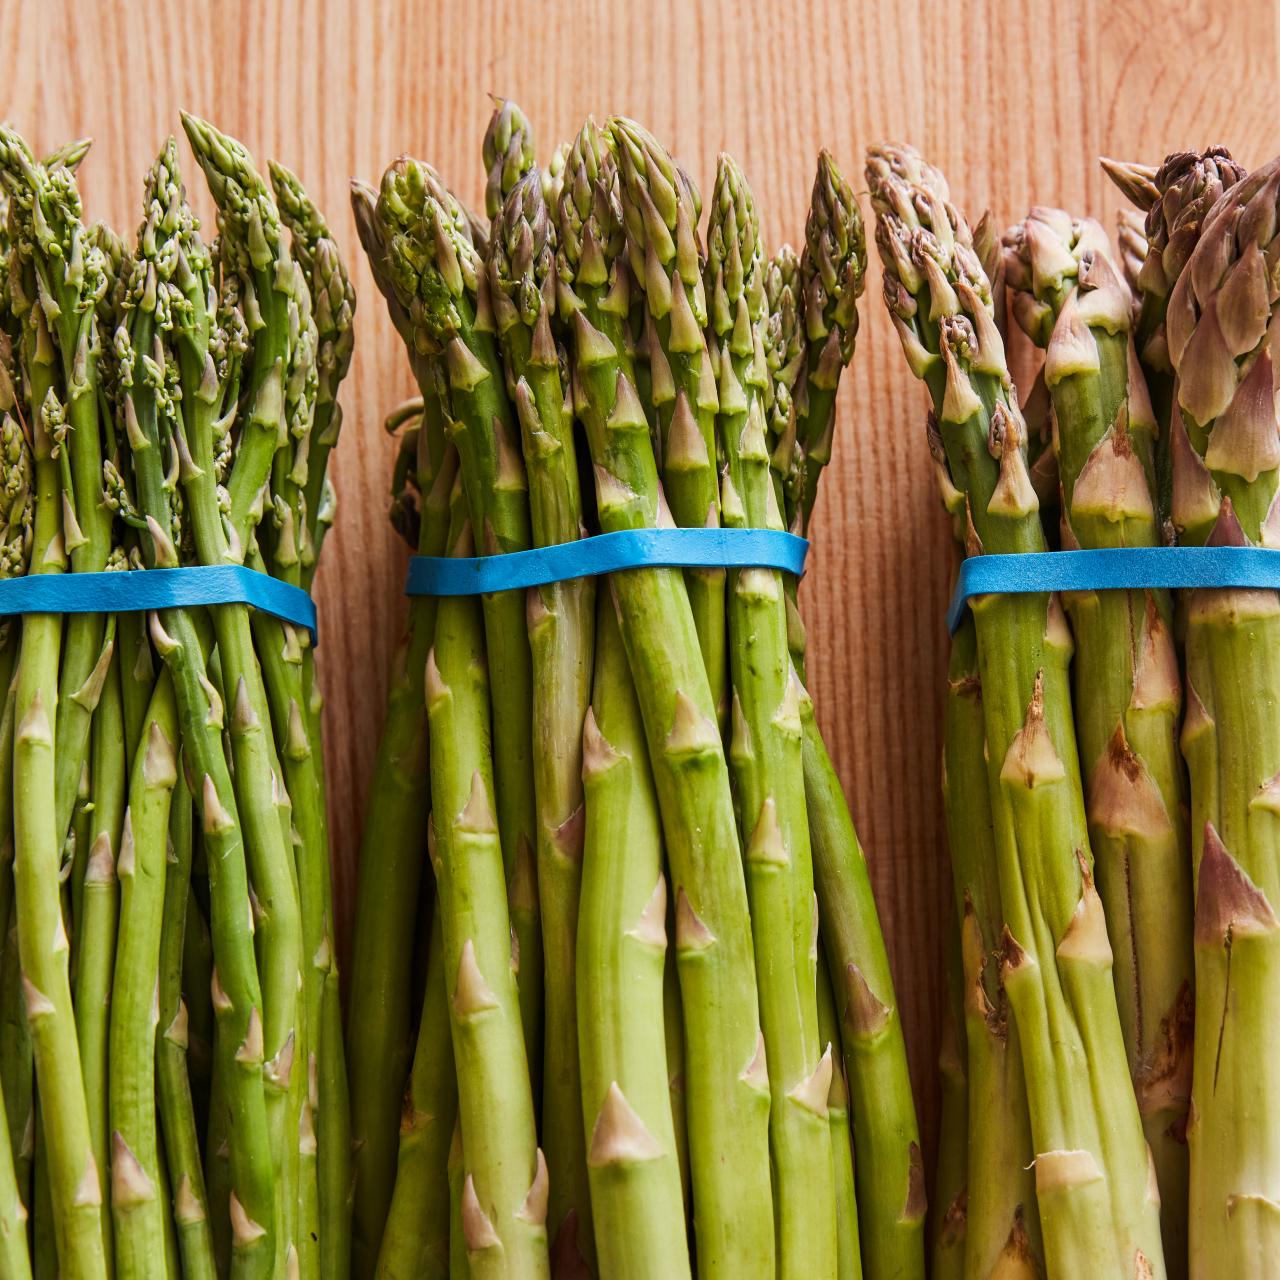 How To Store Asparagus Before Cooking